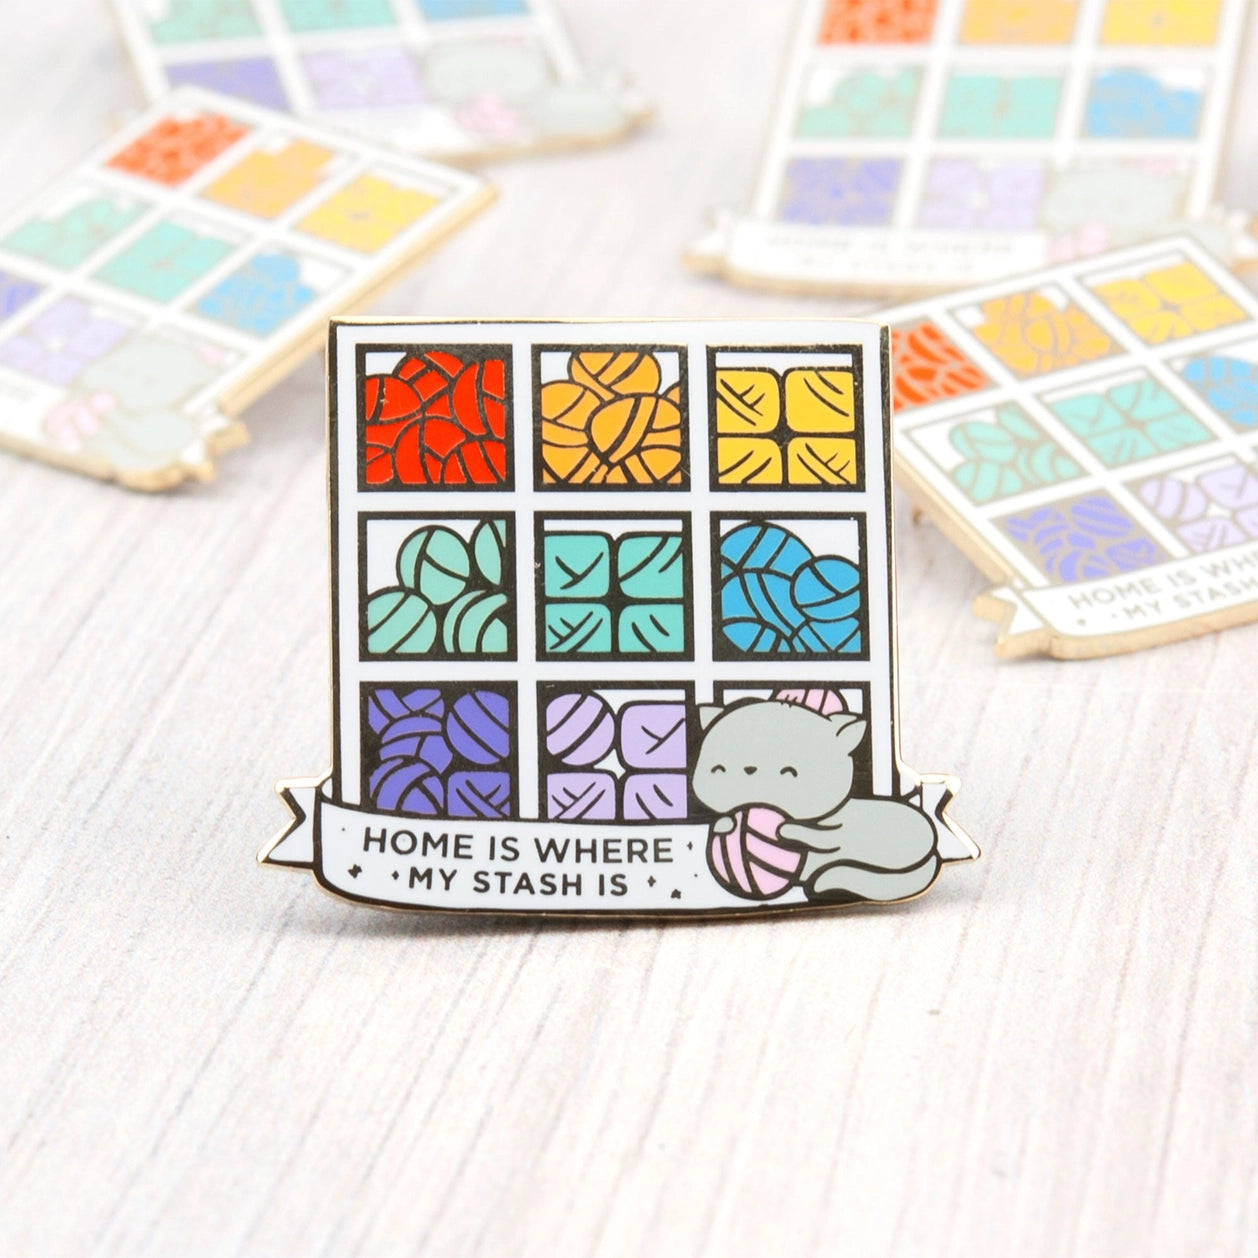 The Clever Clove Enamel Pins